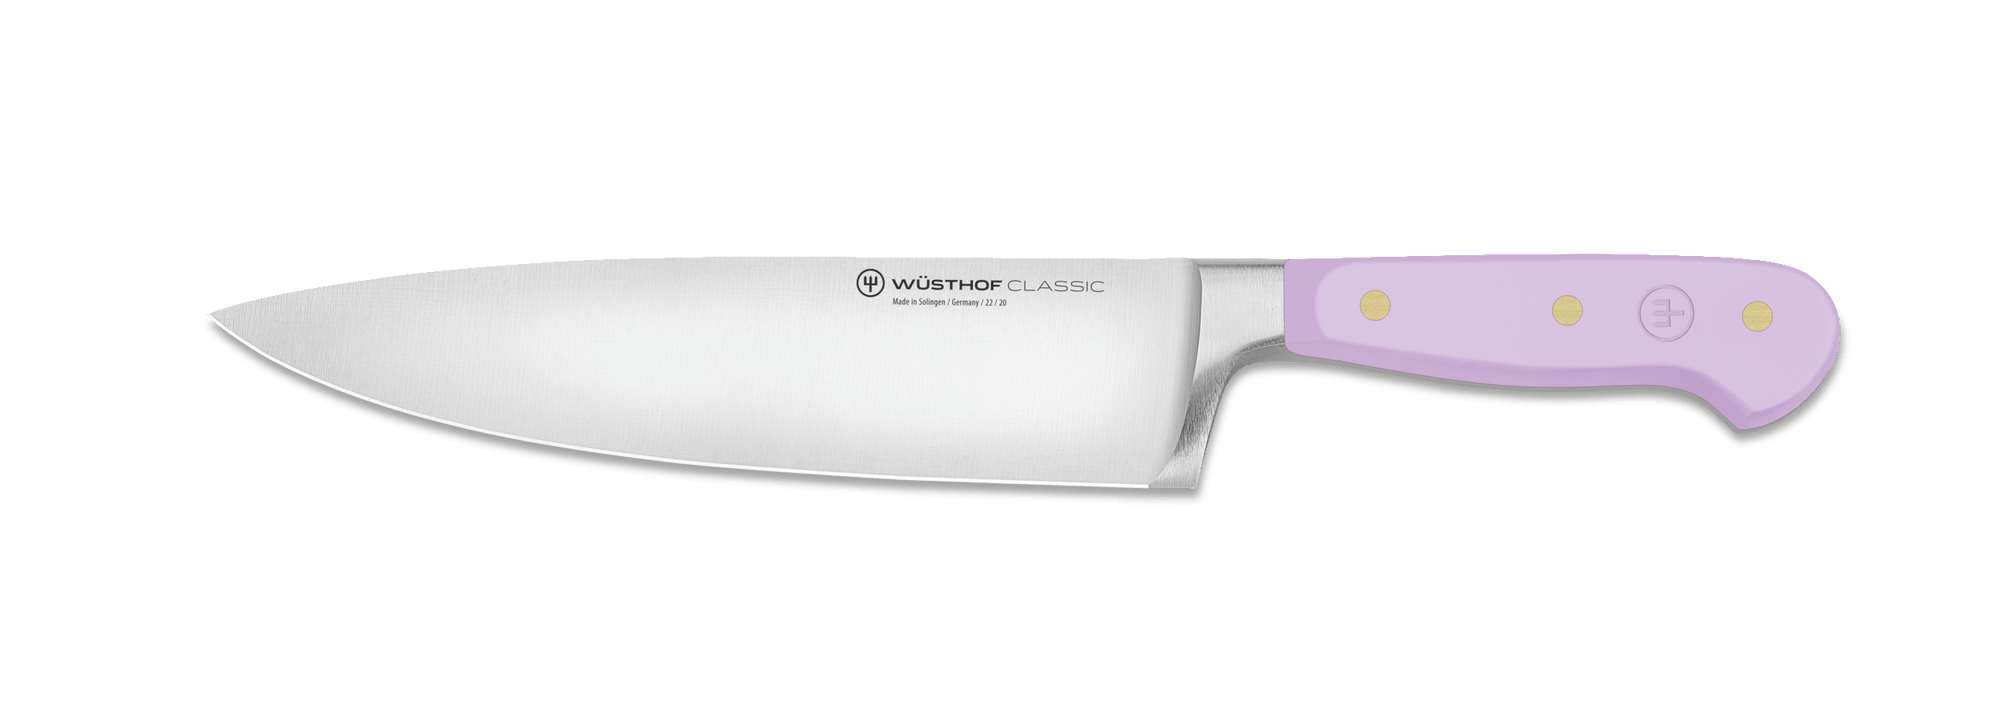 Wusthof Classic 8" Chef's Knife - Lavender